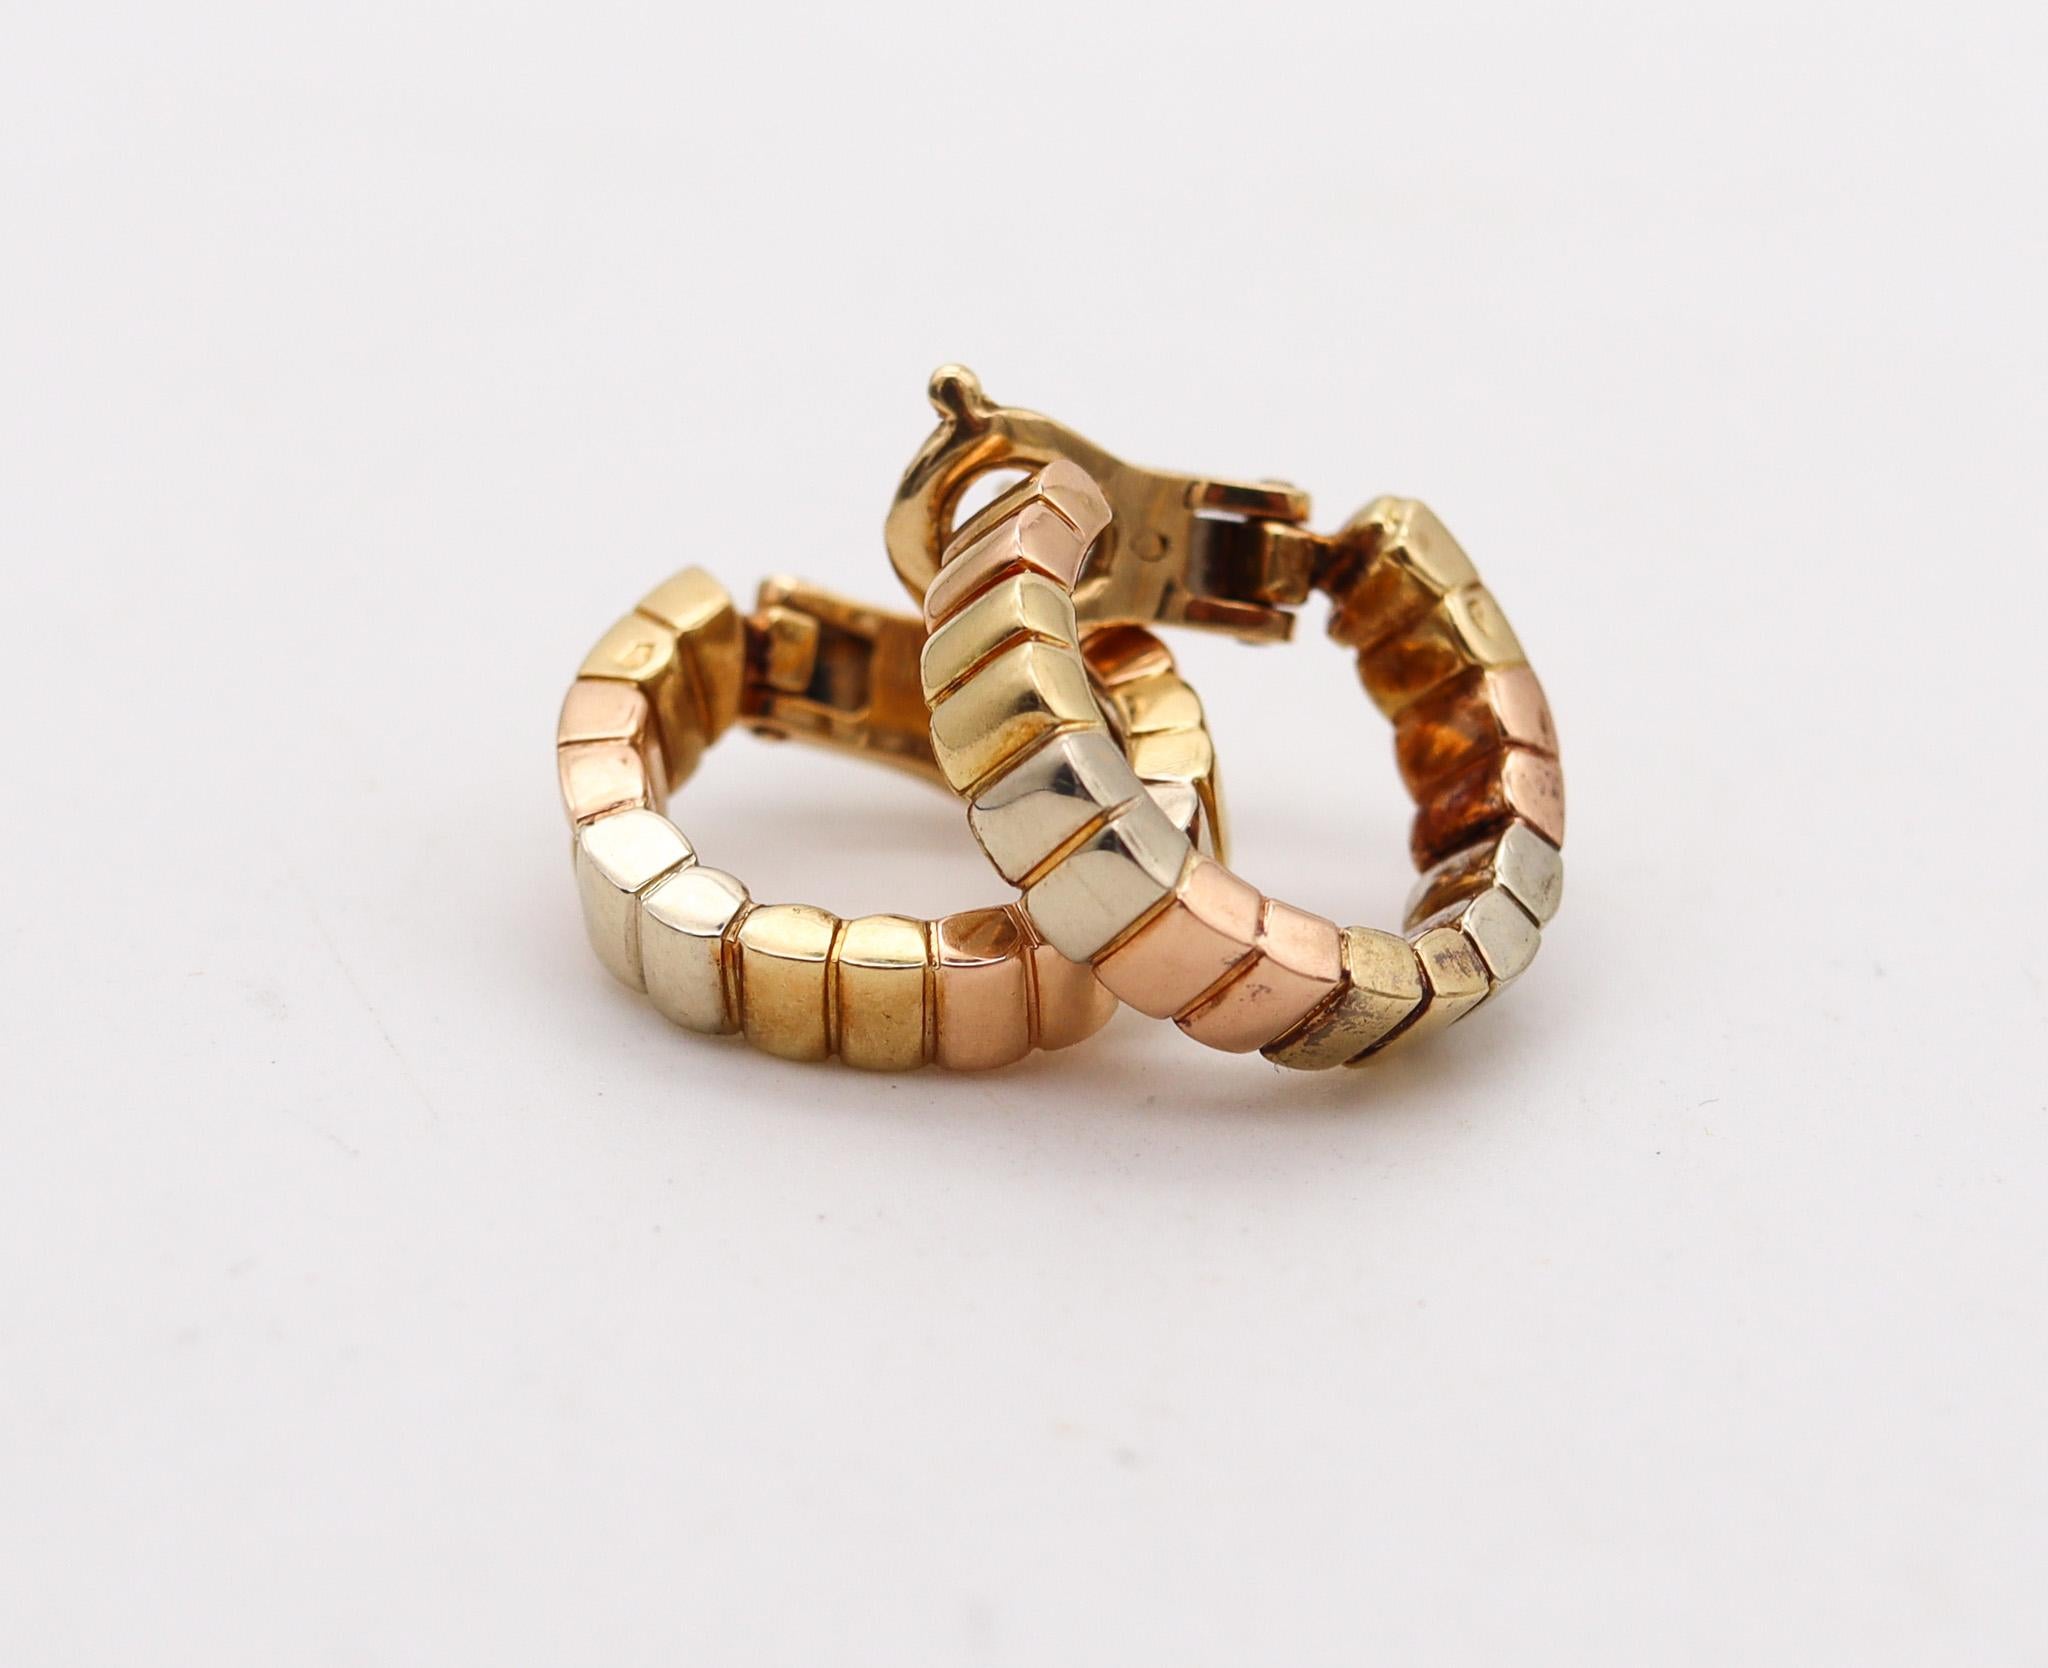 Van Cleef & Arpels Paris Modernist Three Color Hoops Earrings in Solid 18Kt Gold In Excellent Condition For Sale In Miami, FL